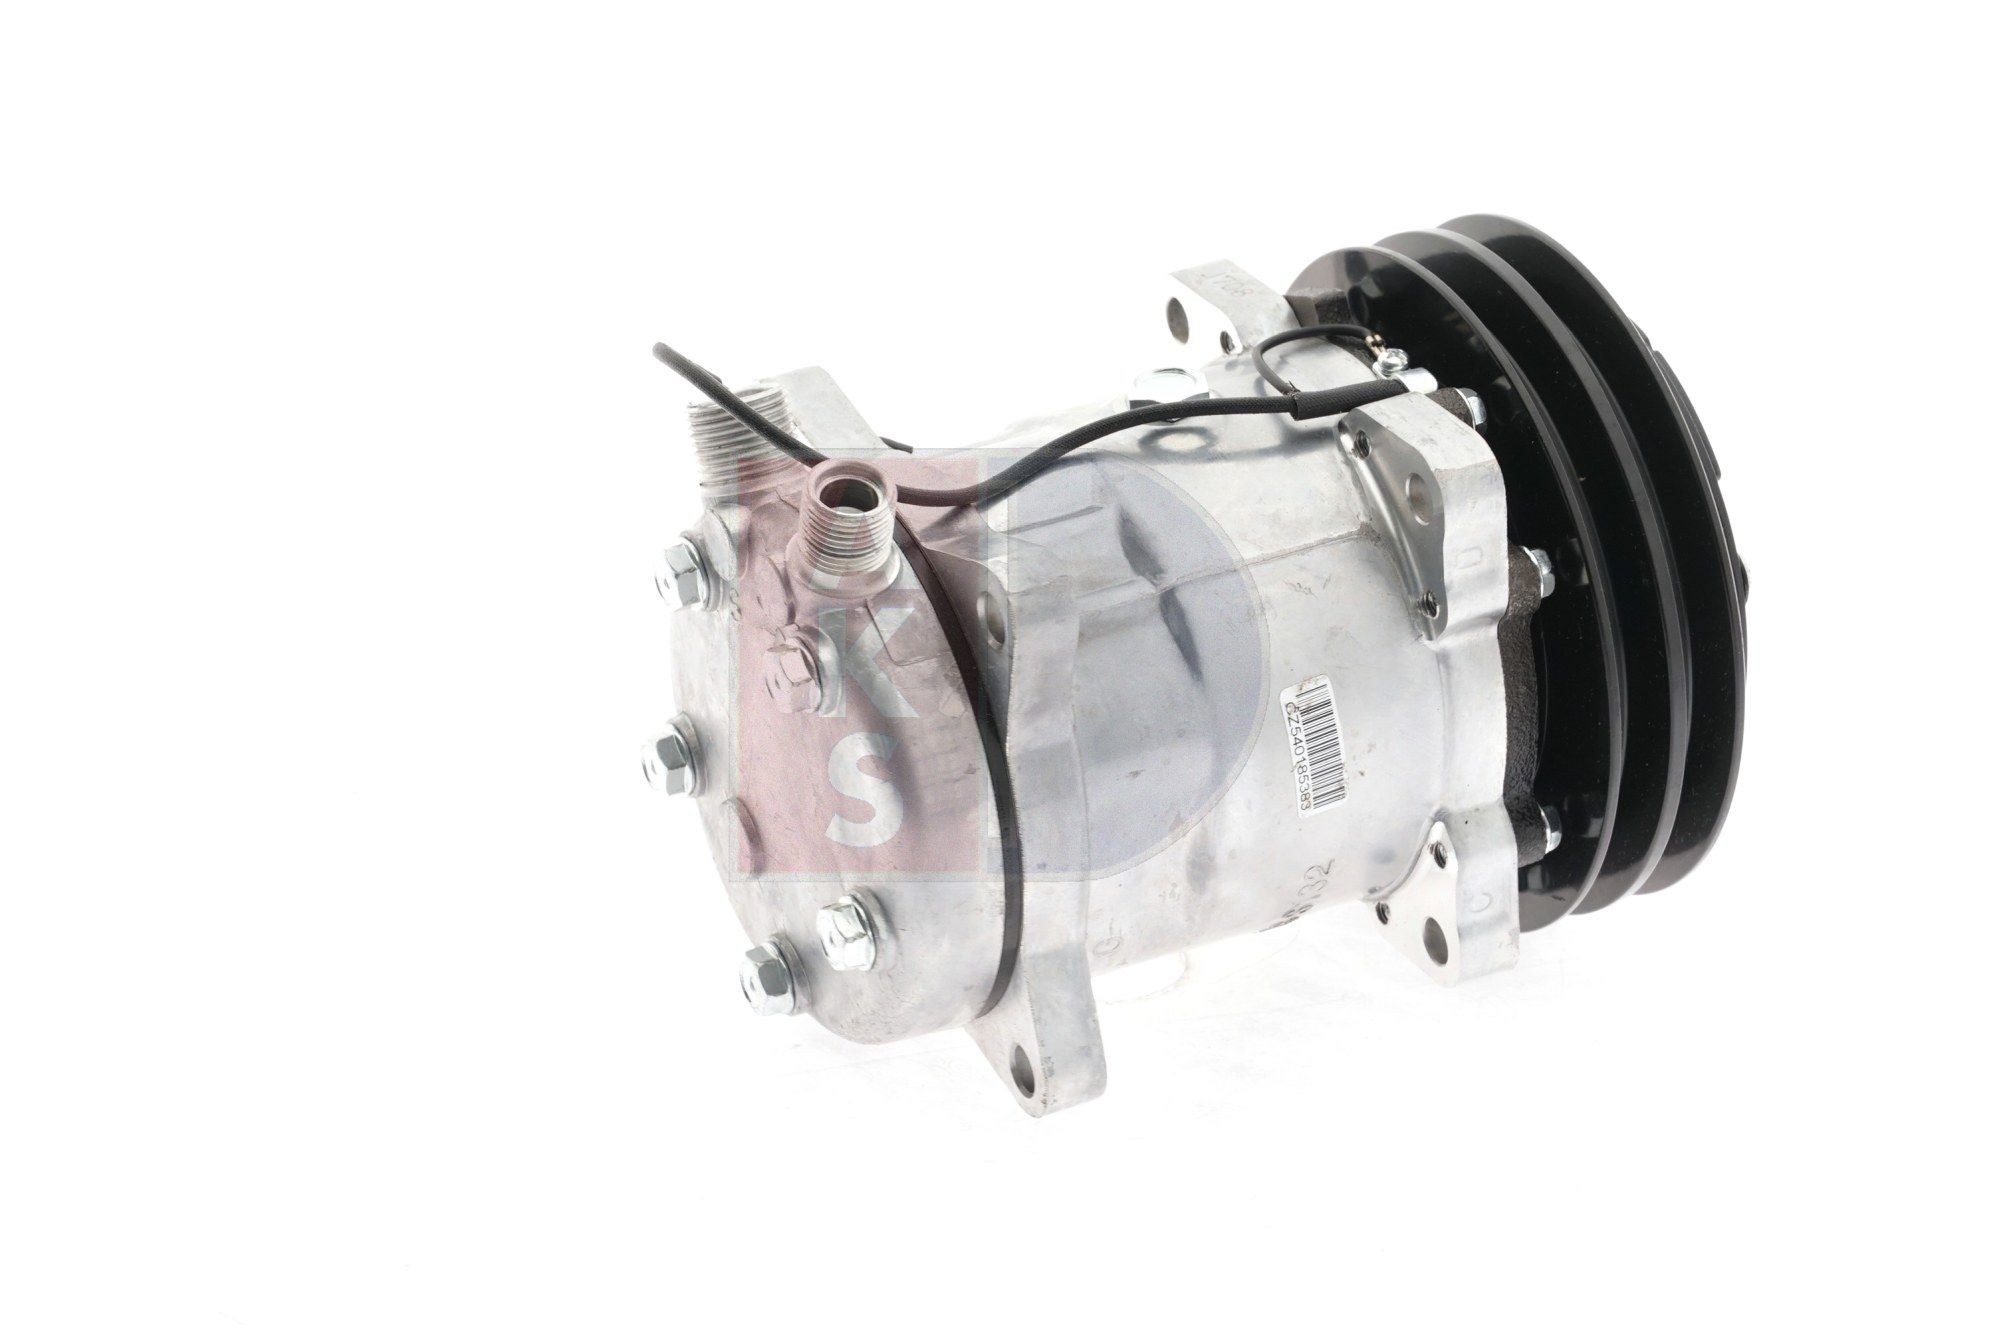 Air conditioning compressor 850635N from AKS DASIS